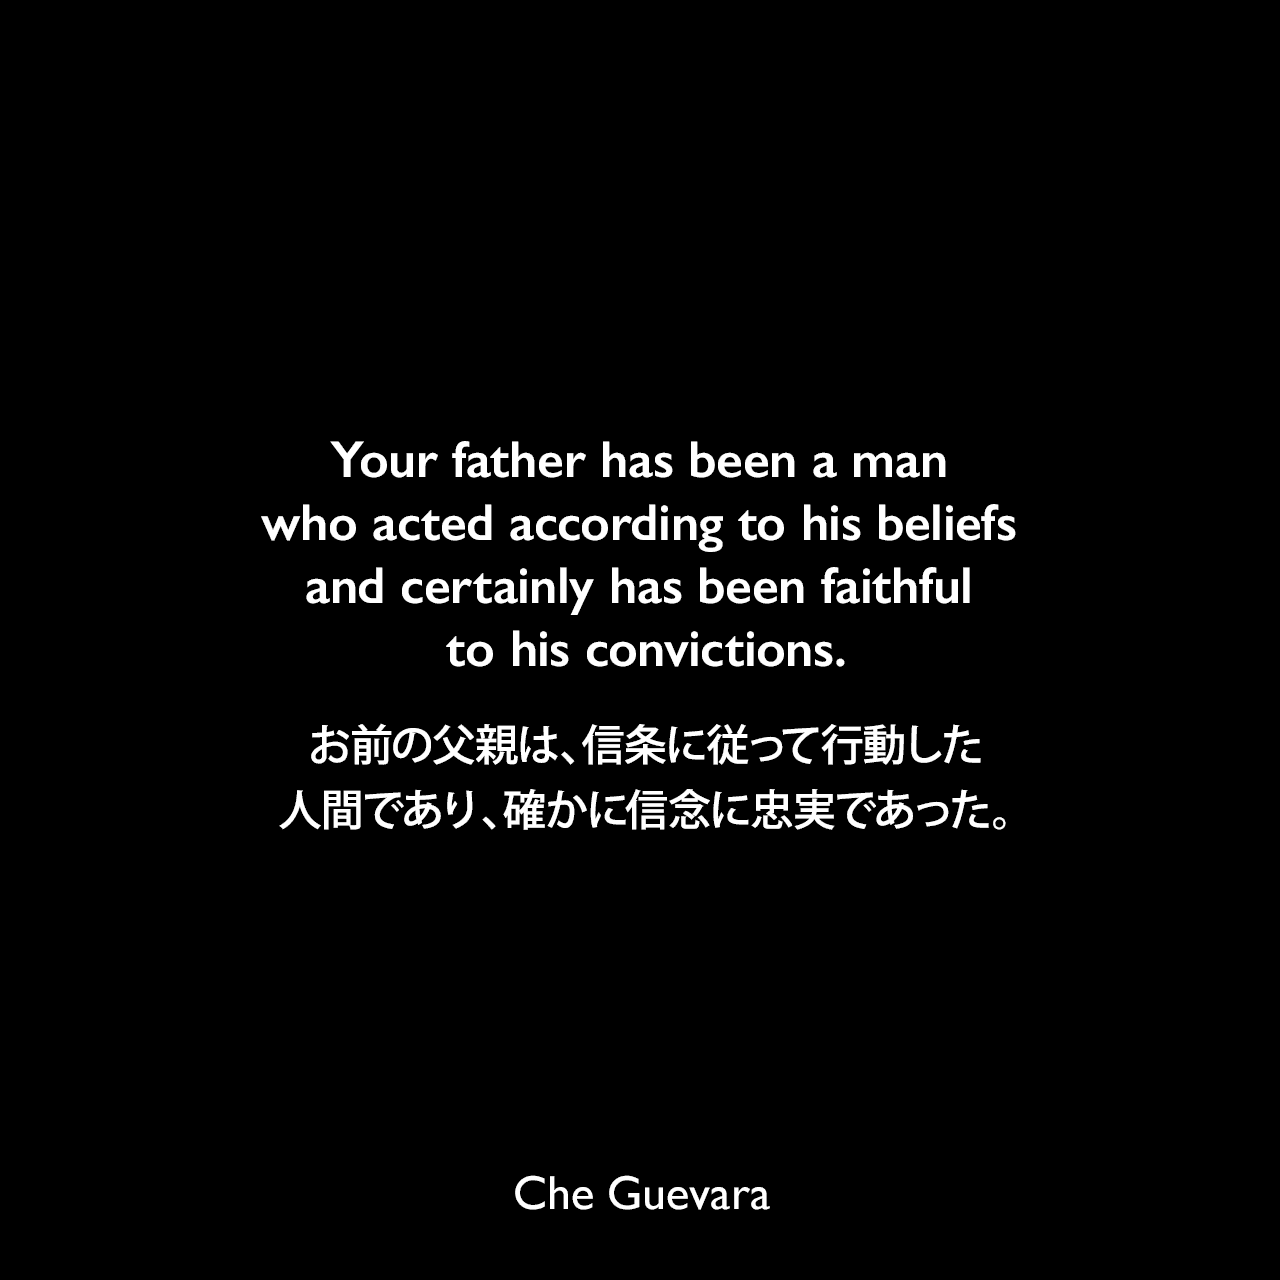 Your father has been a man who acted according to his beliefs and certainly has been faithful to his convictions.お前の父親は、信条に従って行動した人間であり、確かに信念に忠実であった。- 1965年にチェ・ゲバラが彼の子供達に宛てた手紙「パパからの最後の手紙」よりChe Guevara